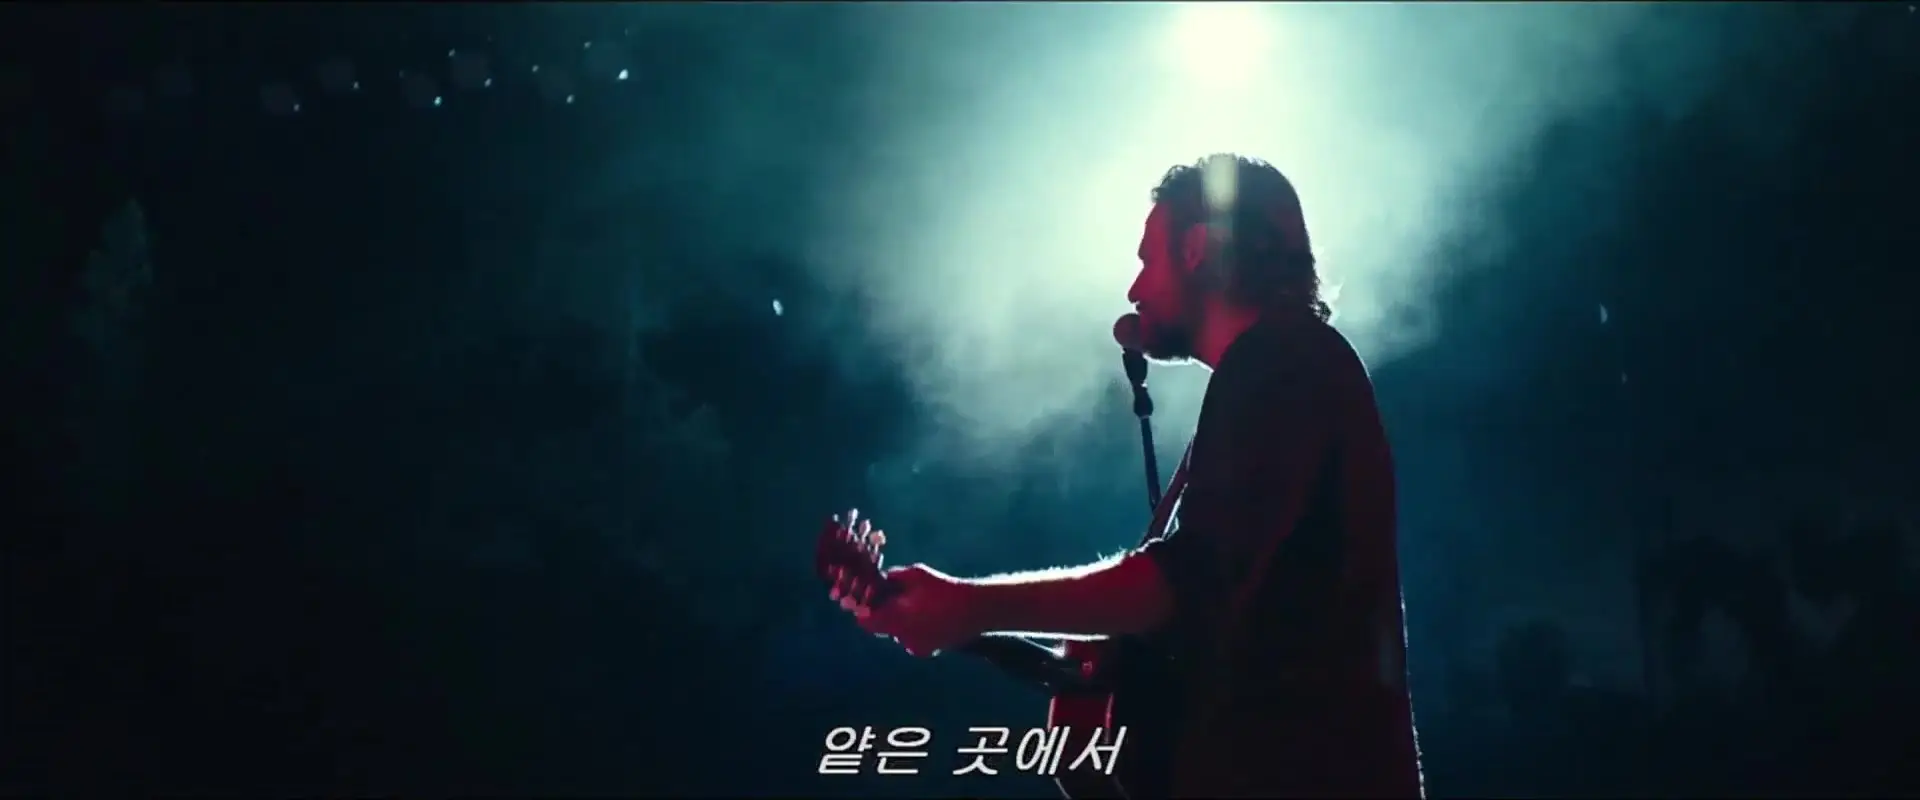 a star is born 2018 torrent download yify